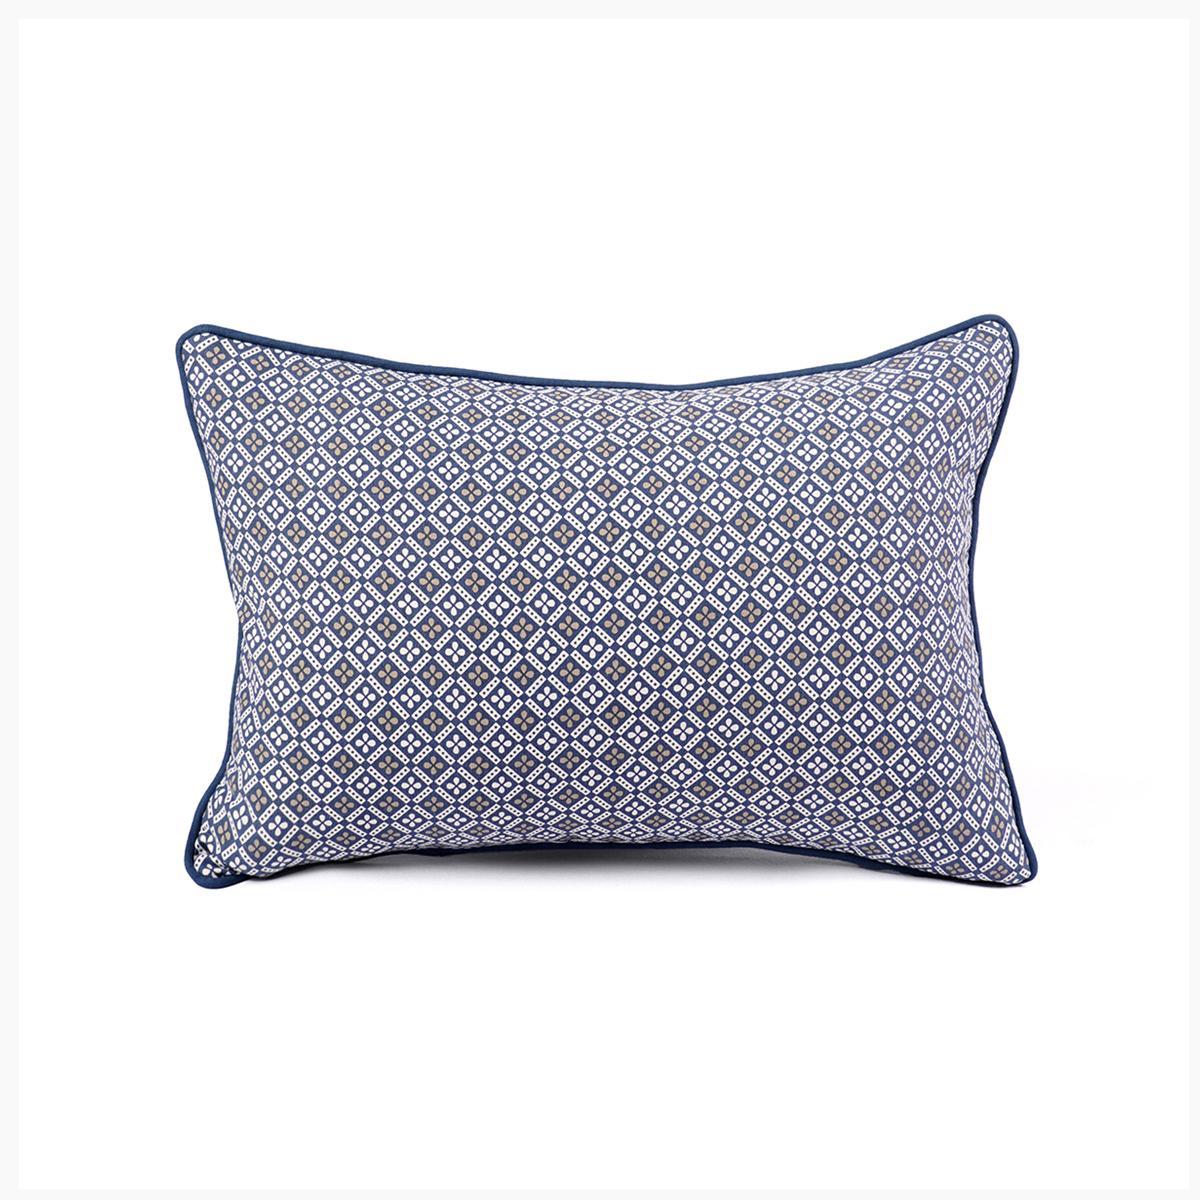 Indigo/dark blue DOMINOTERIE geometric print cotton pillow cover, sizes available